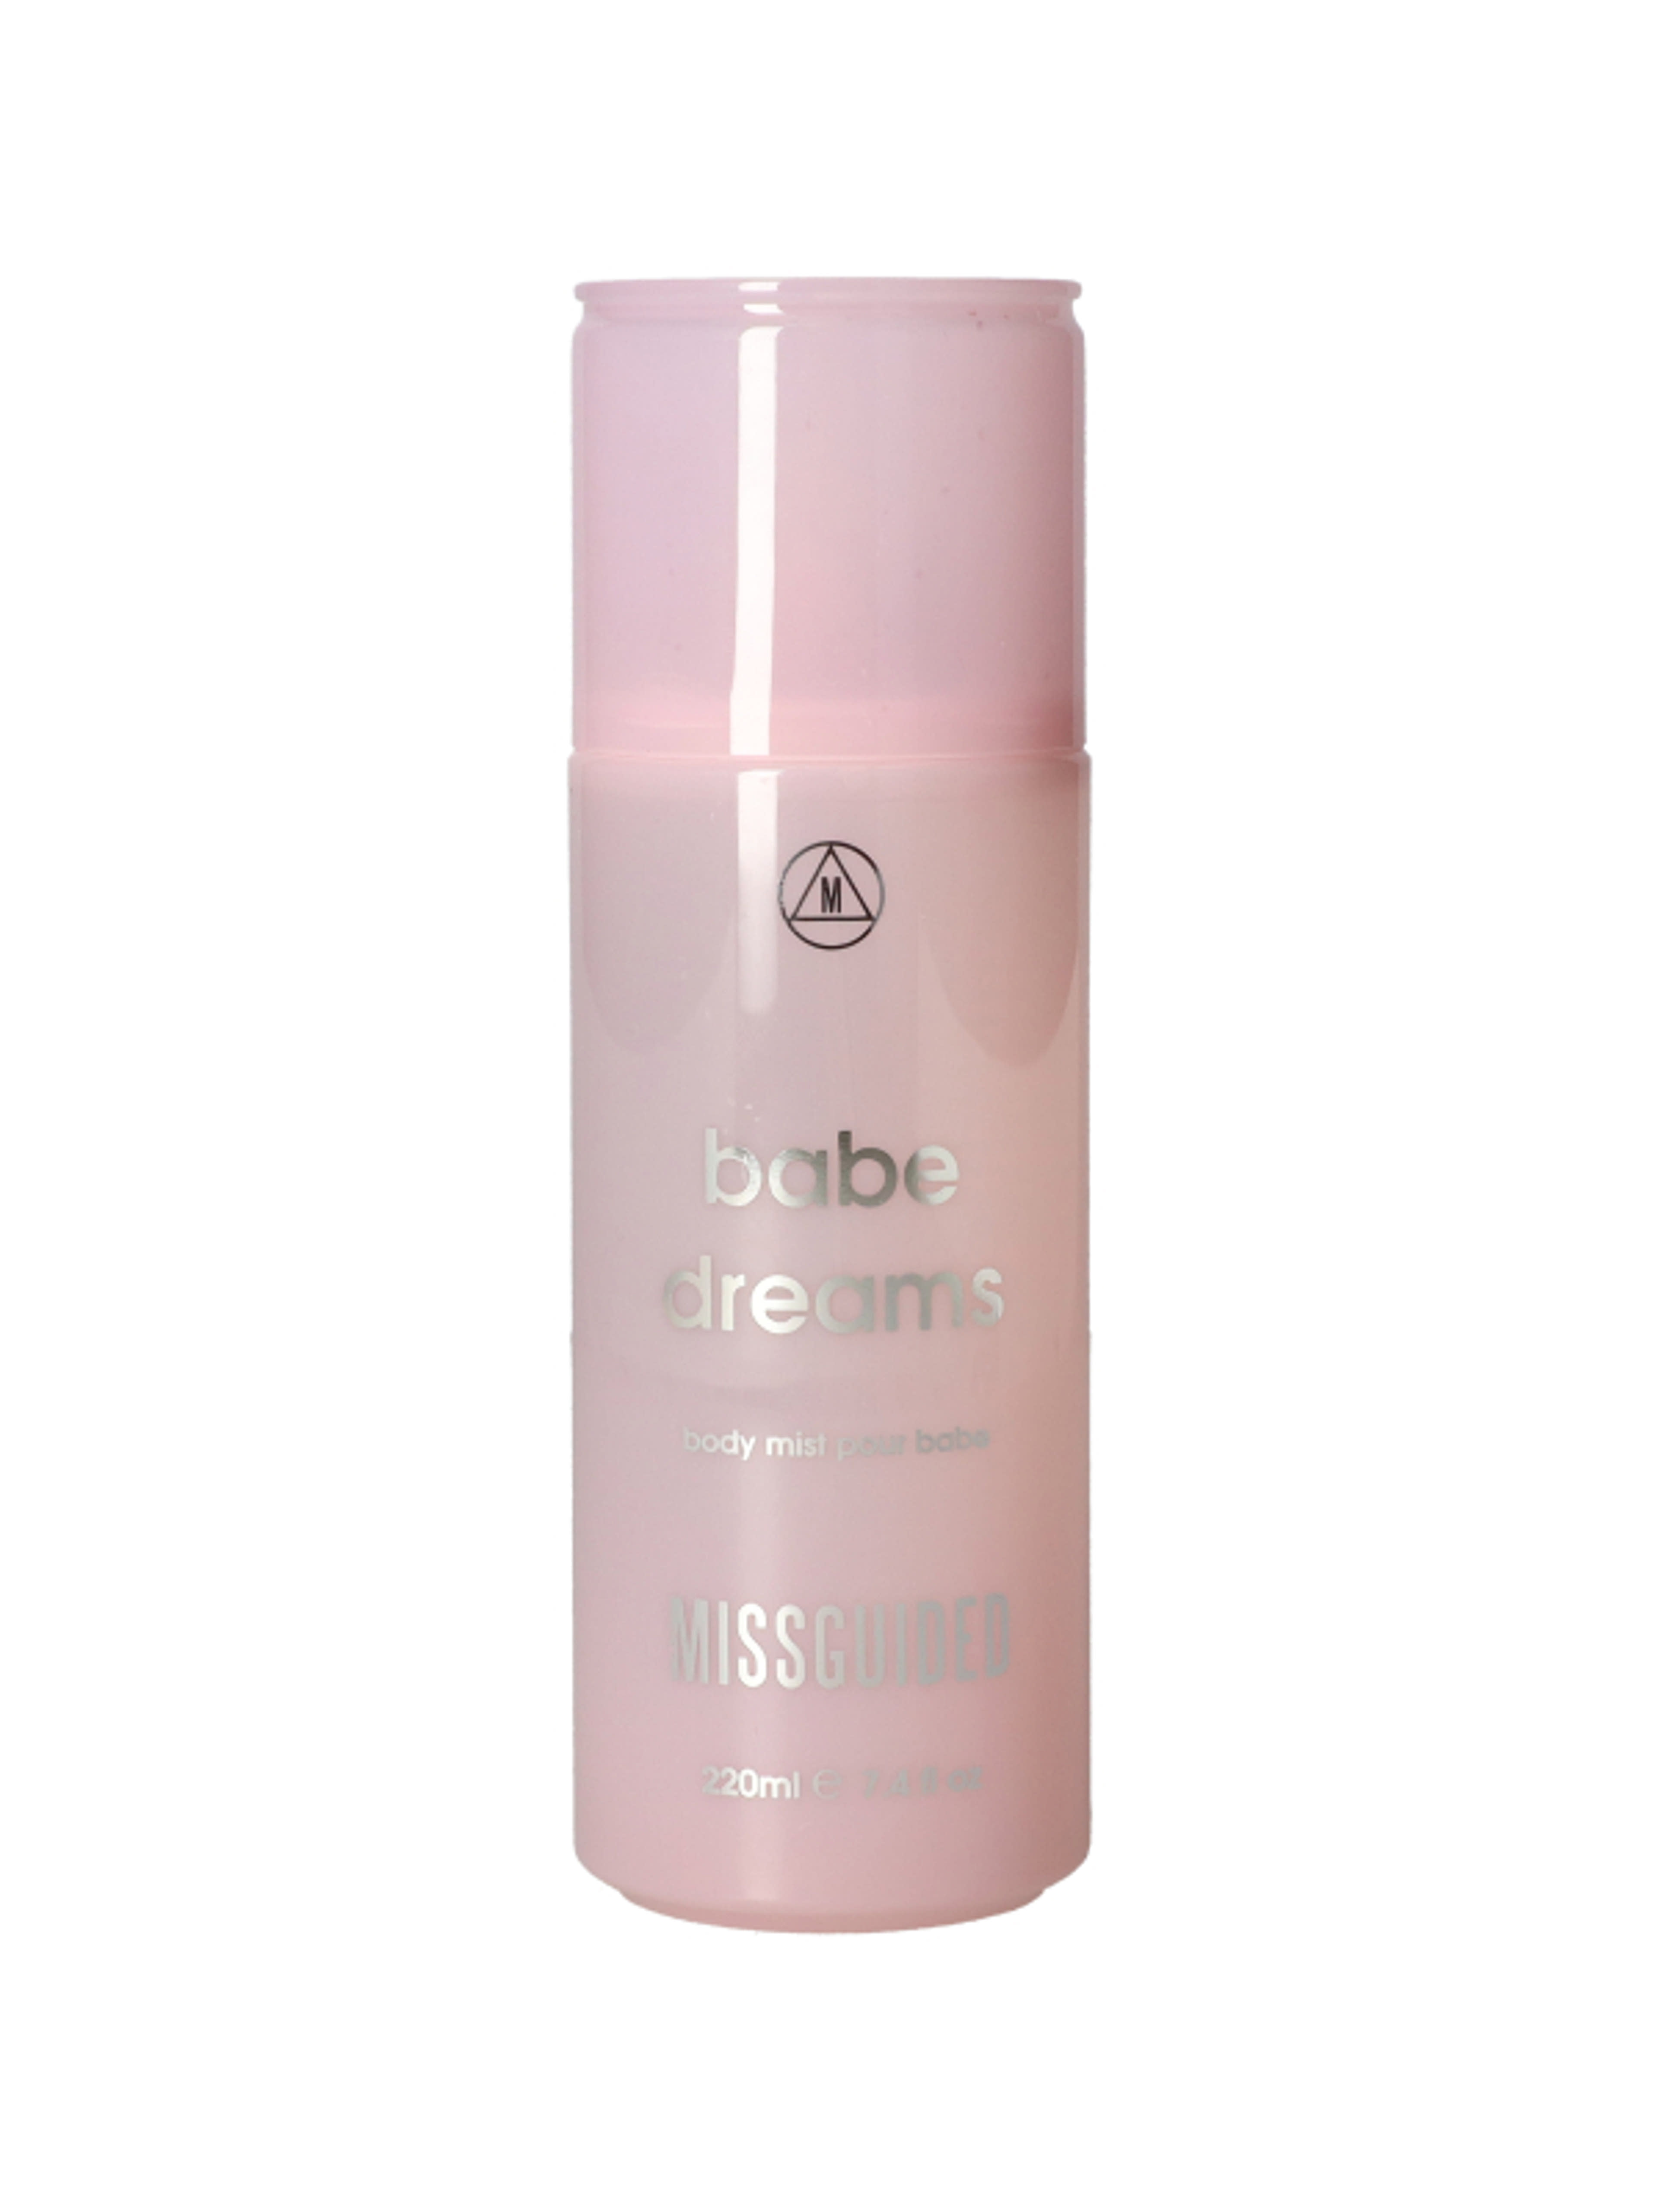 Missguided babe dreams body mist 220 ml-1